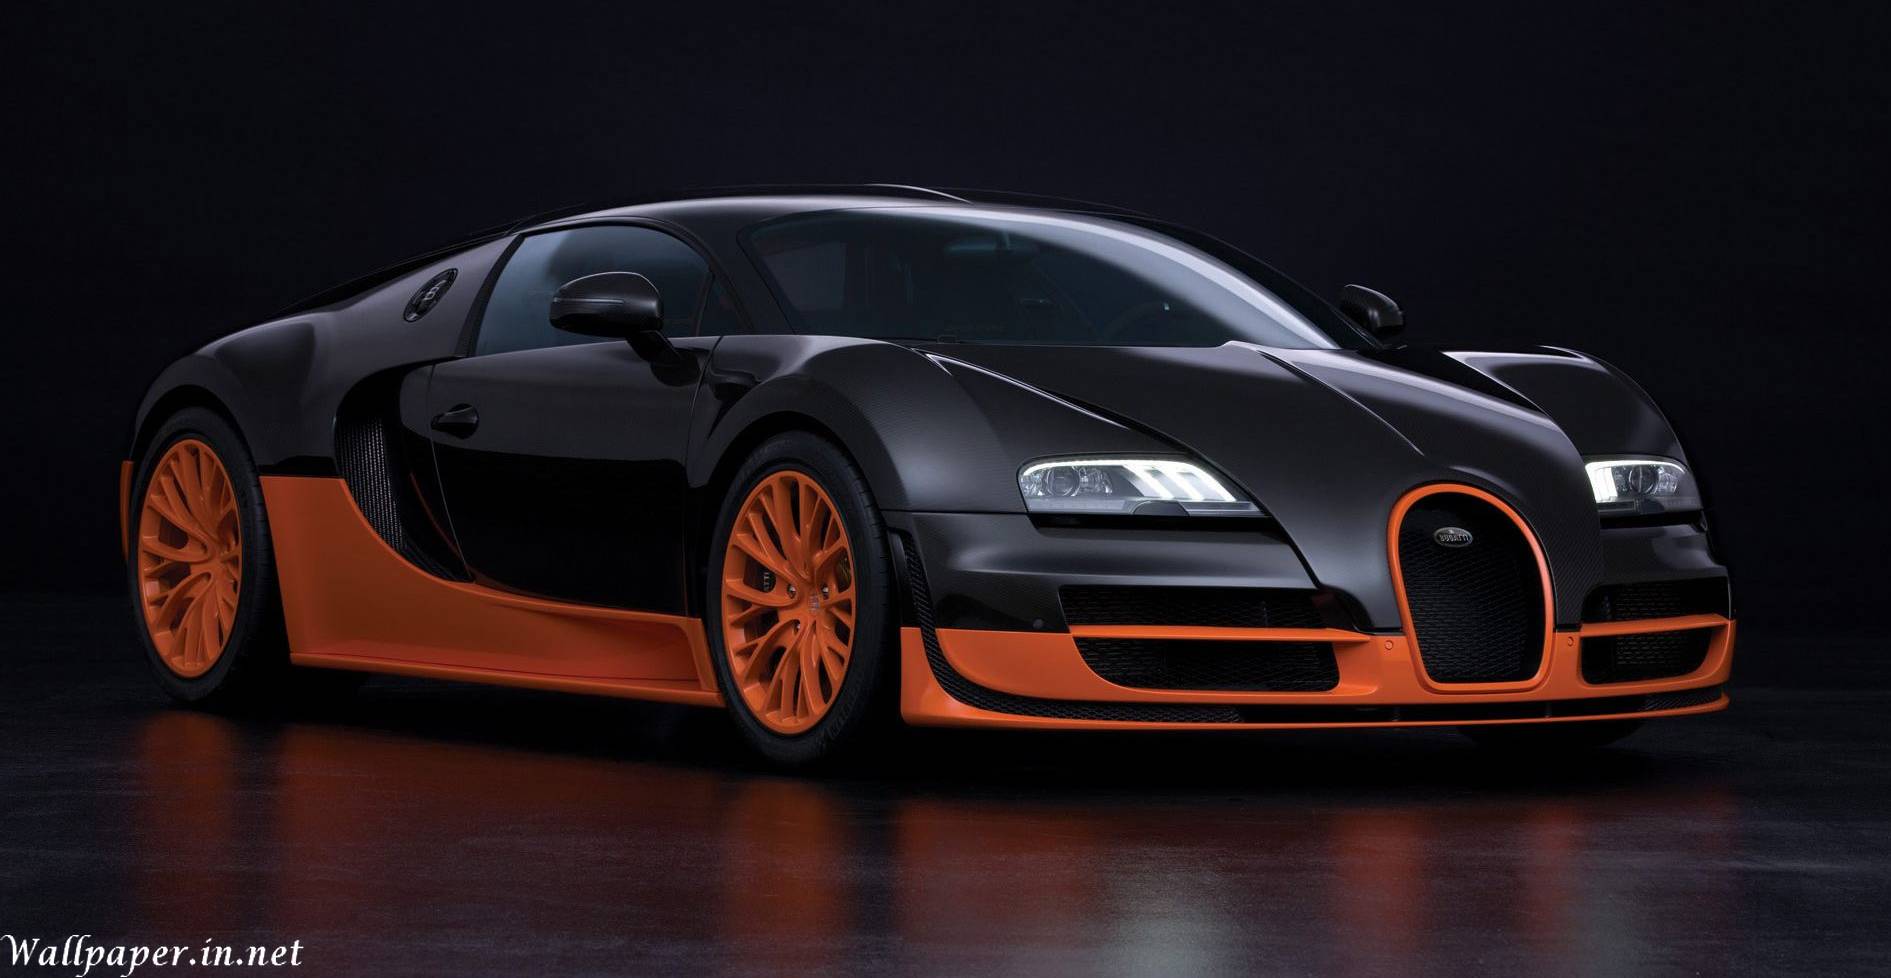 Widescreen Car For Windows Archives Page Of Full HD Pics Cars